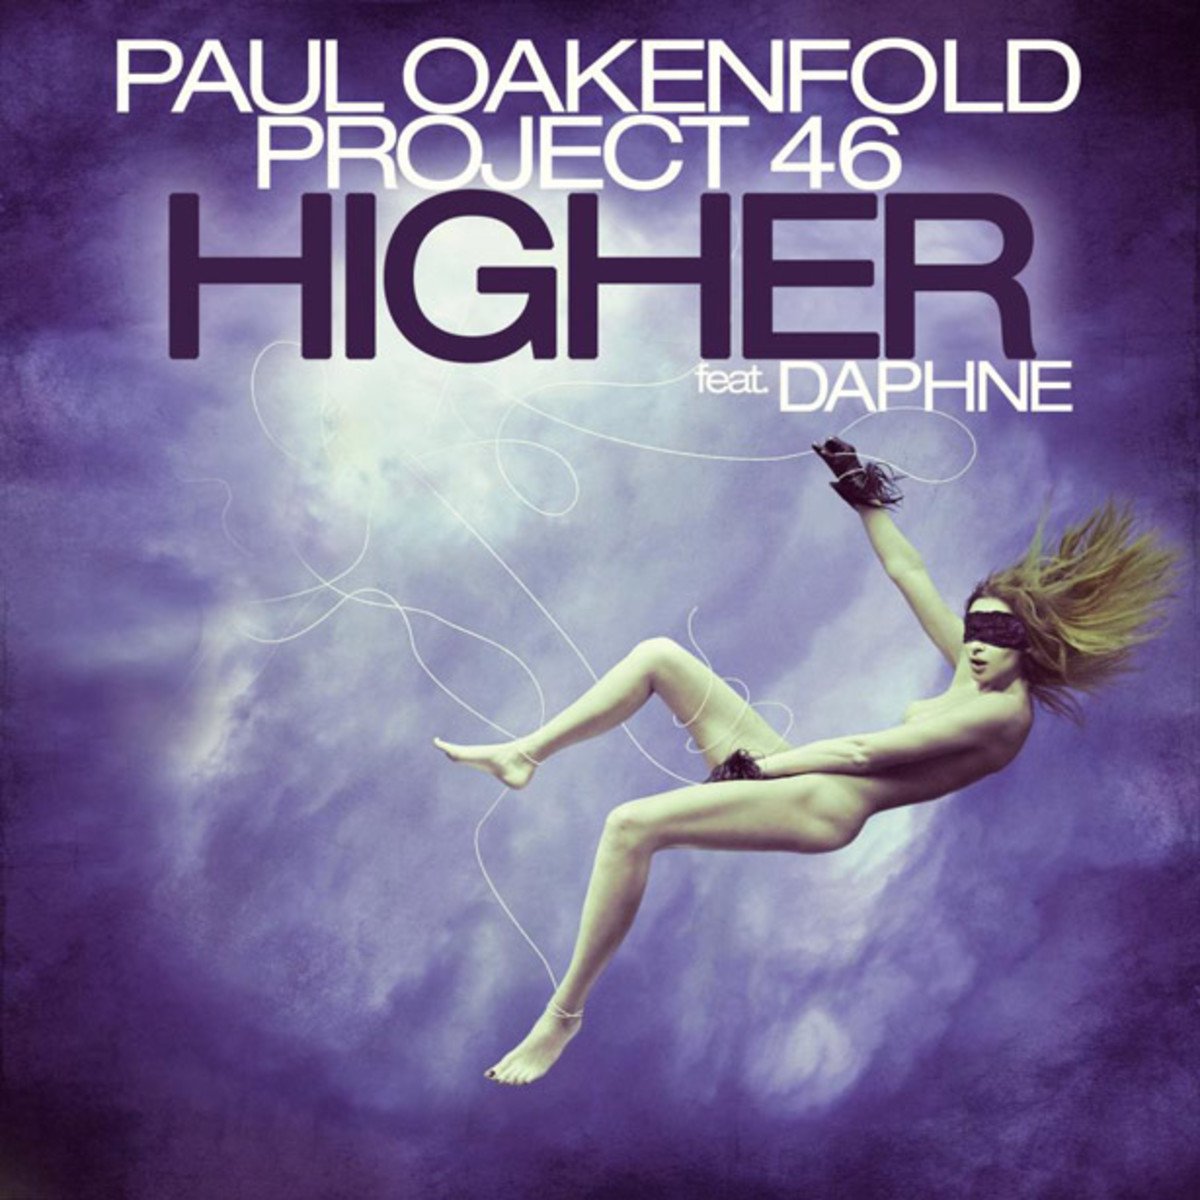 Free Download: Project 46 x Paul Oakenfold “Higher” featuring Daphne